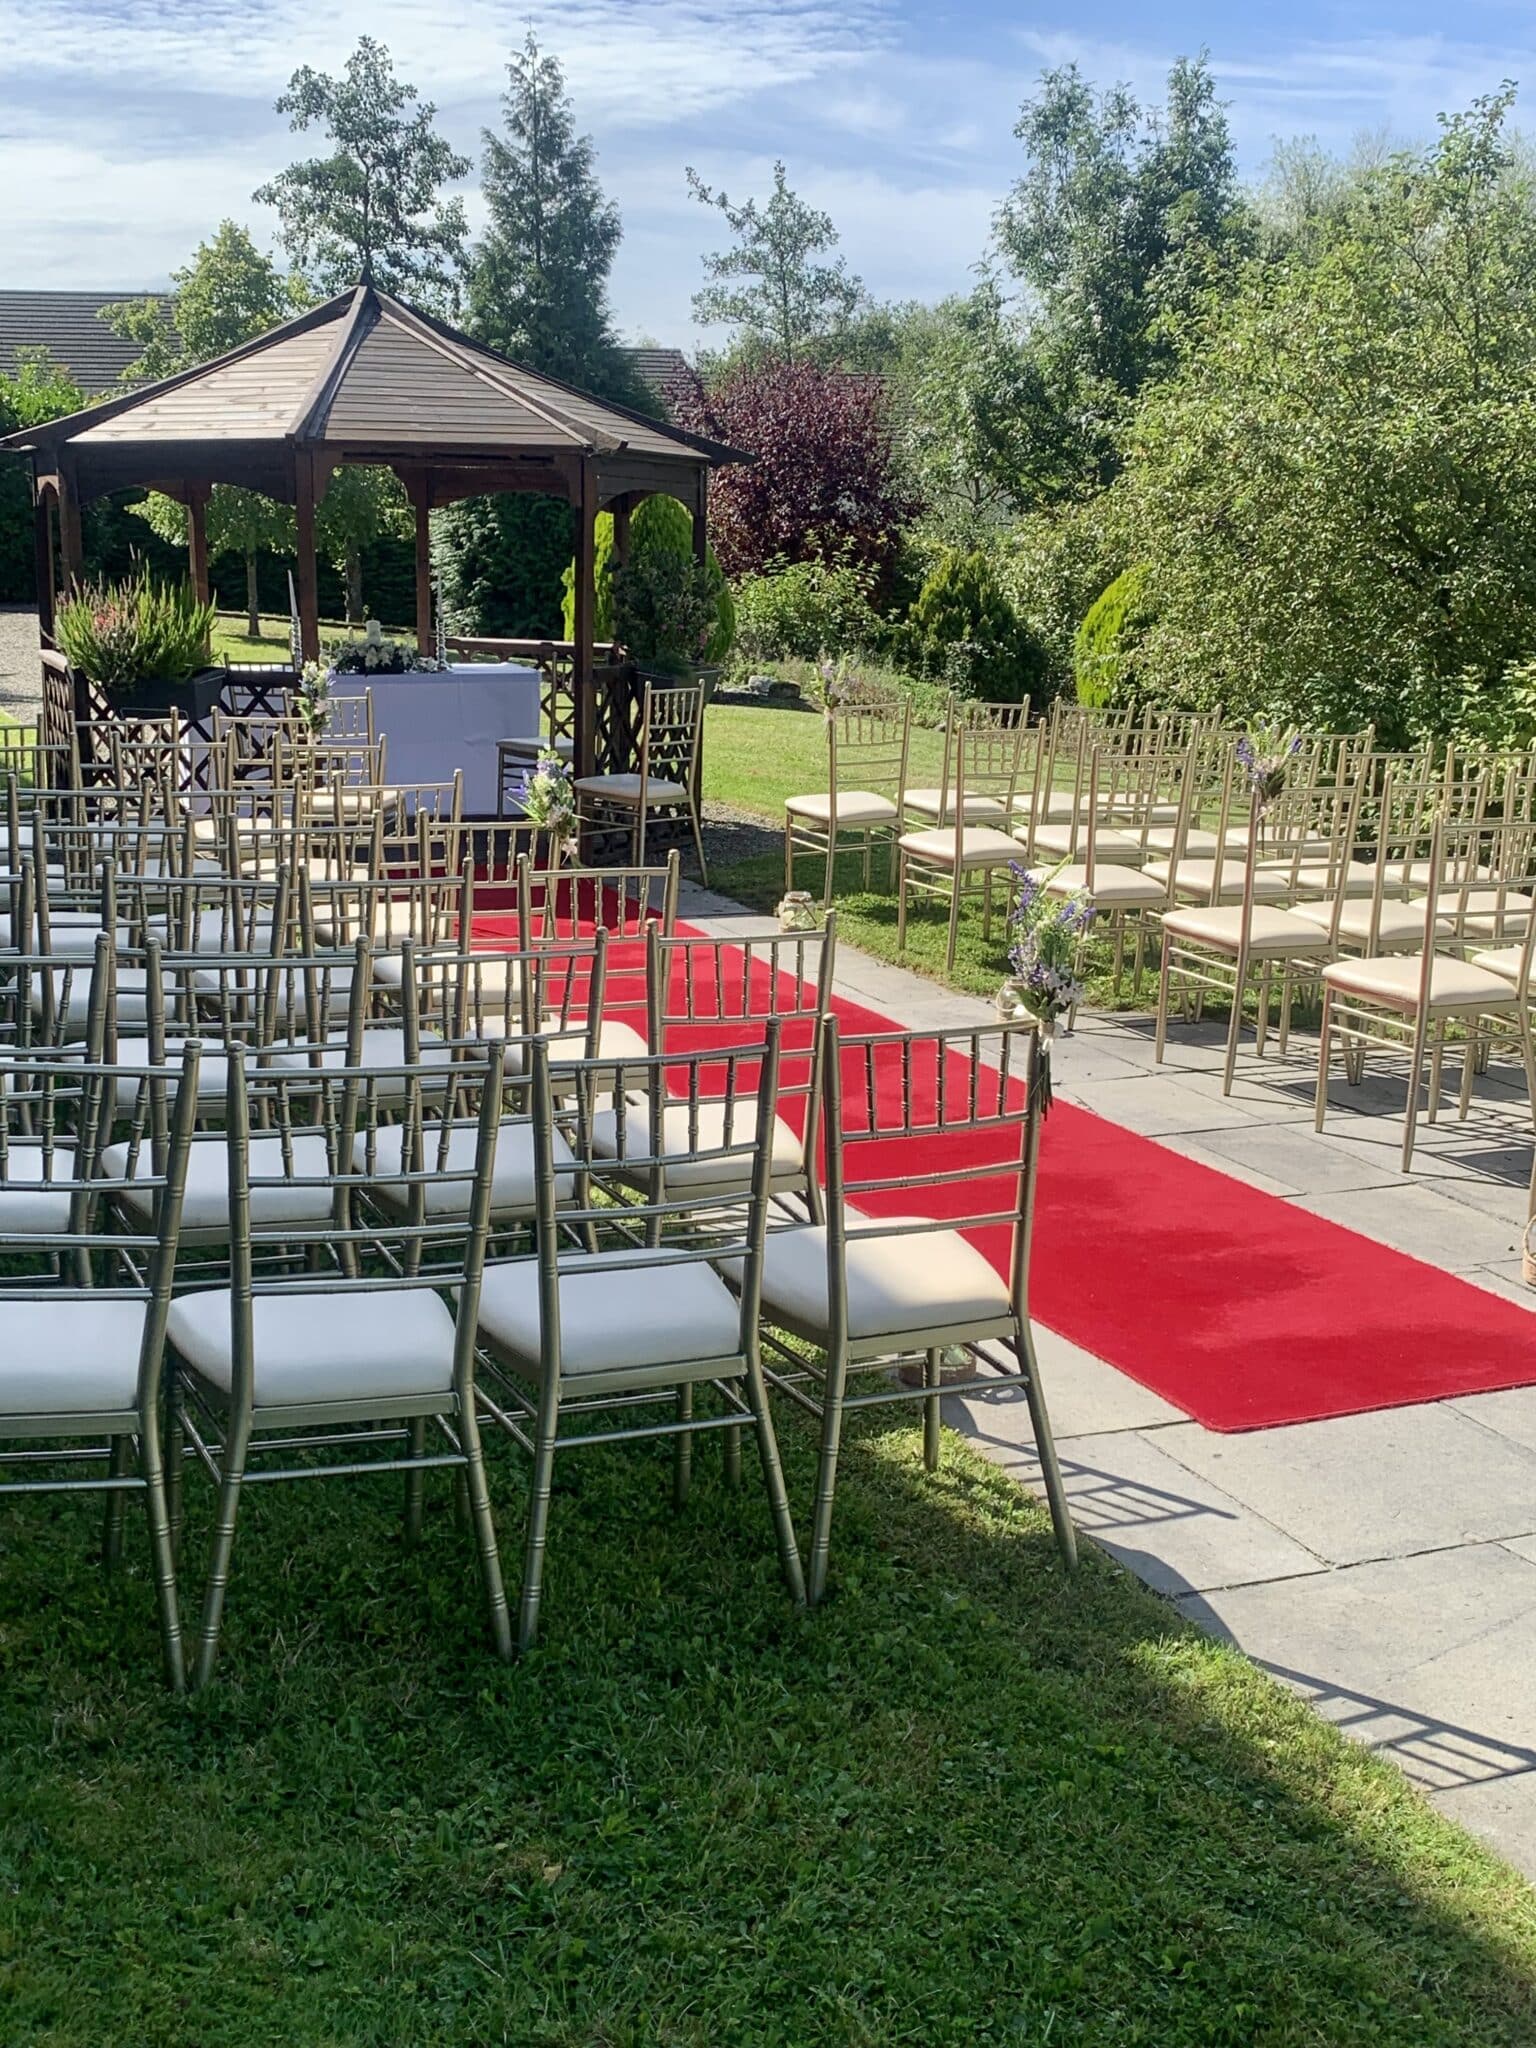 The Gazebo set up to host a civil ceremony in the gardens of the Woodford Dolmen Hotel.